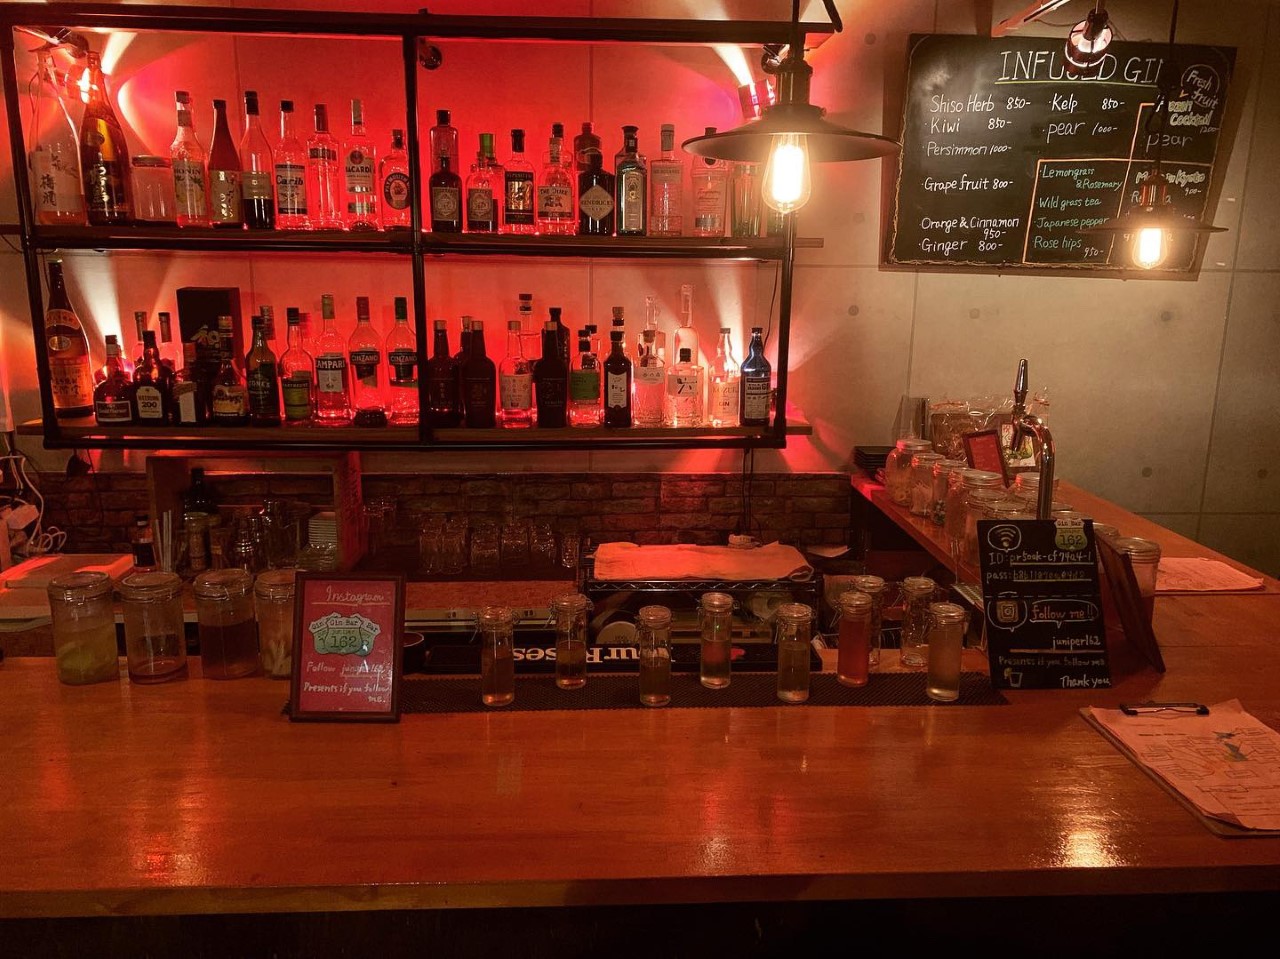 A Gin bar where you can taste domestic Gin and homemade infused Gin